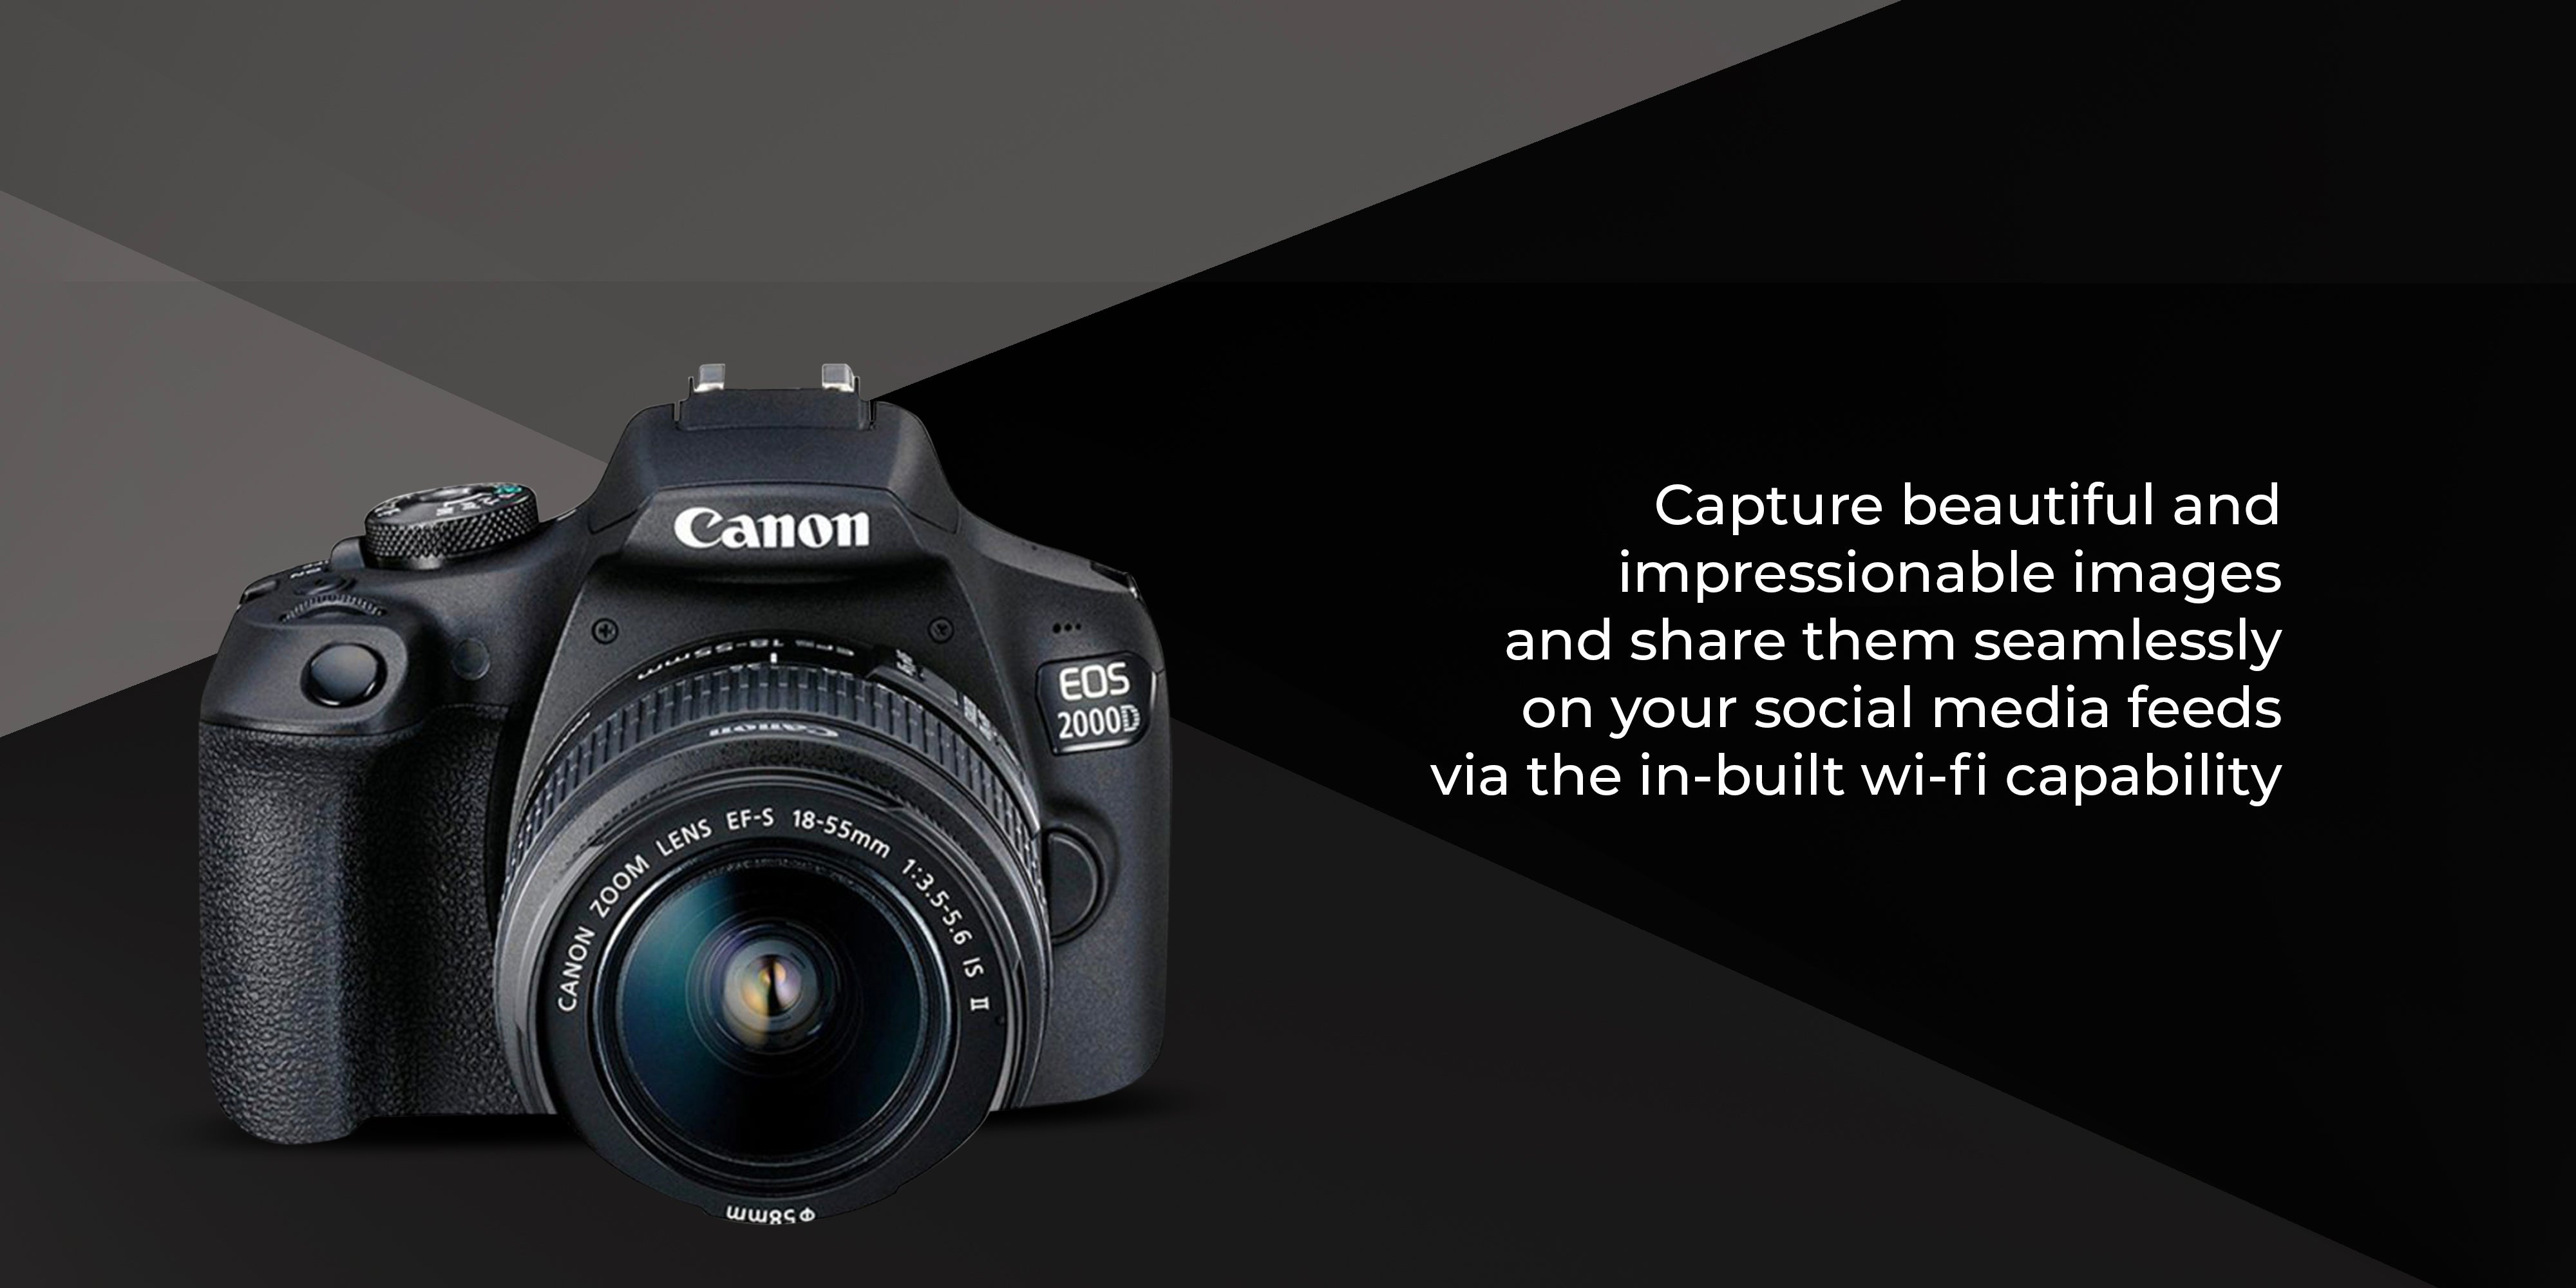 EOS 2000D DSLR With EF-S 18-55mm f/3.5-5.6 IS II Lens 24.1MP,Built-In Wi-Fi And NFC